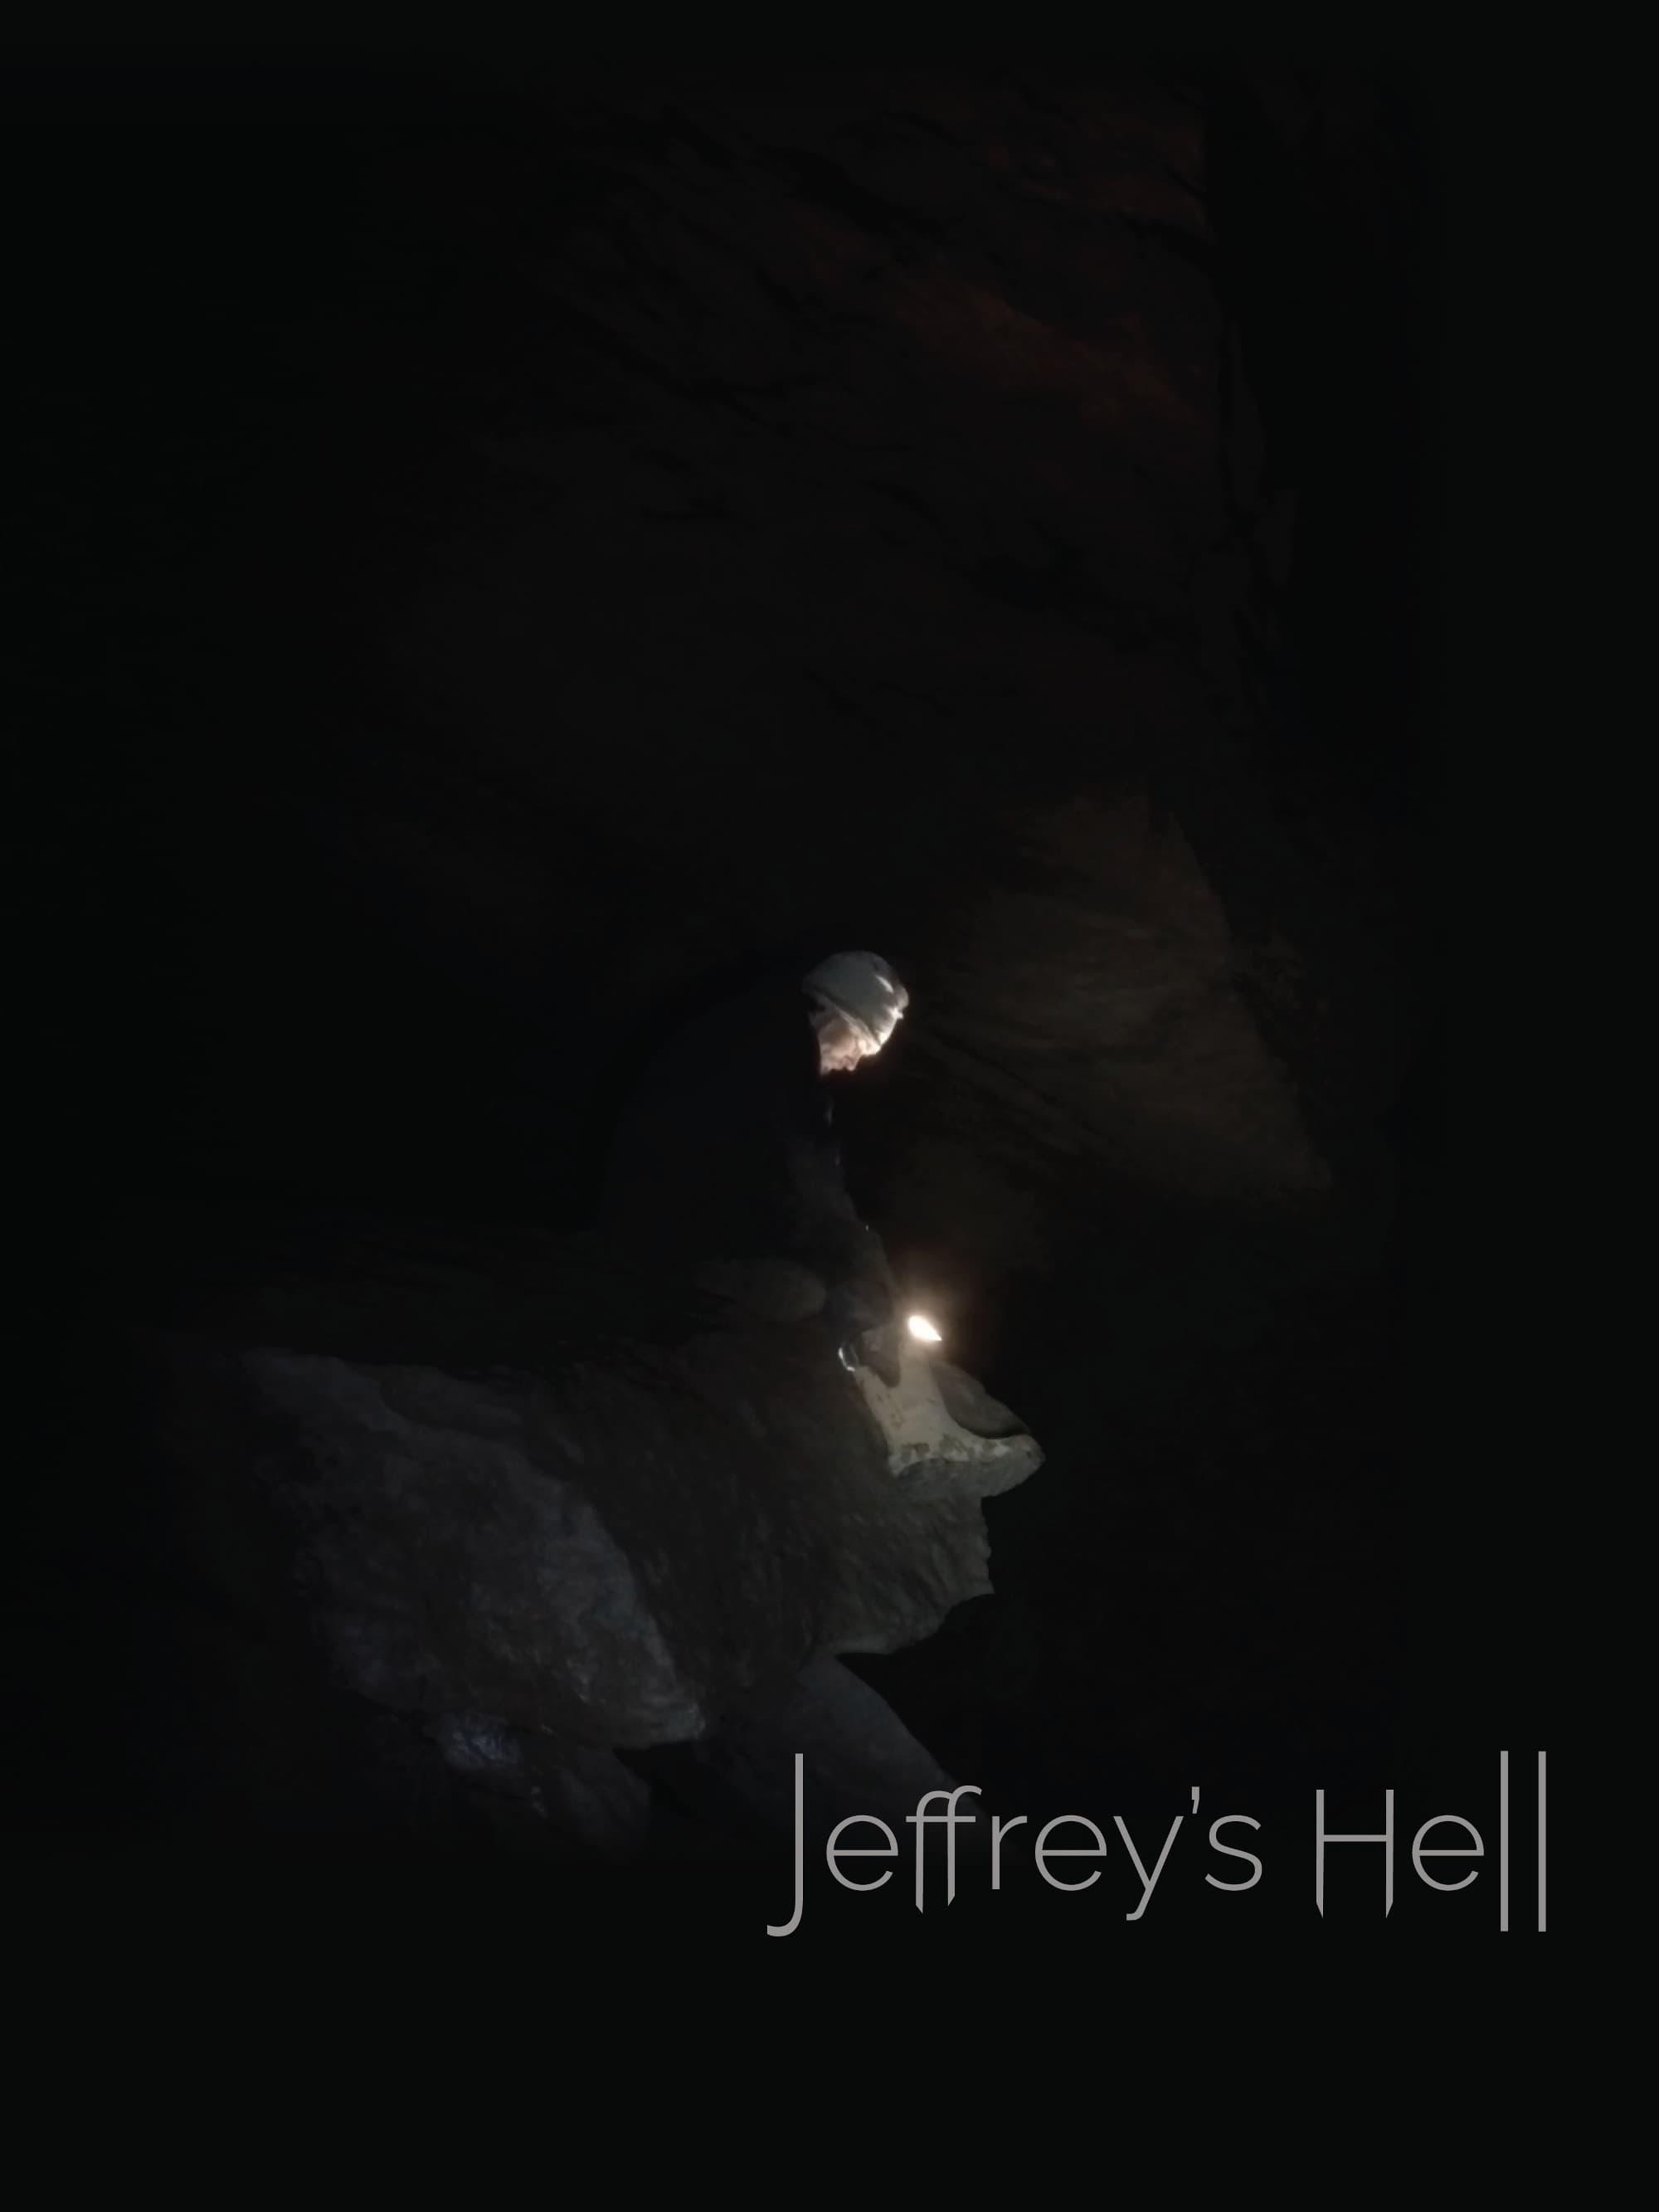 Jeffrey's Hell poster